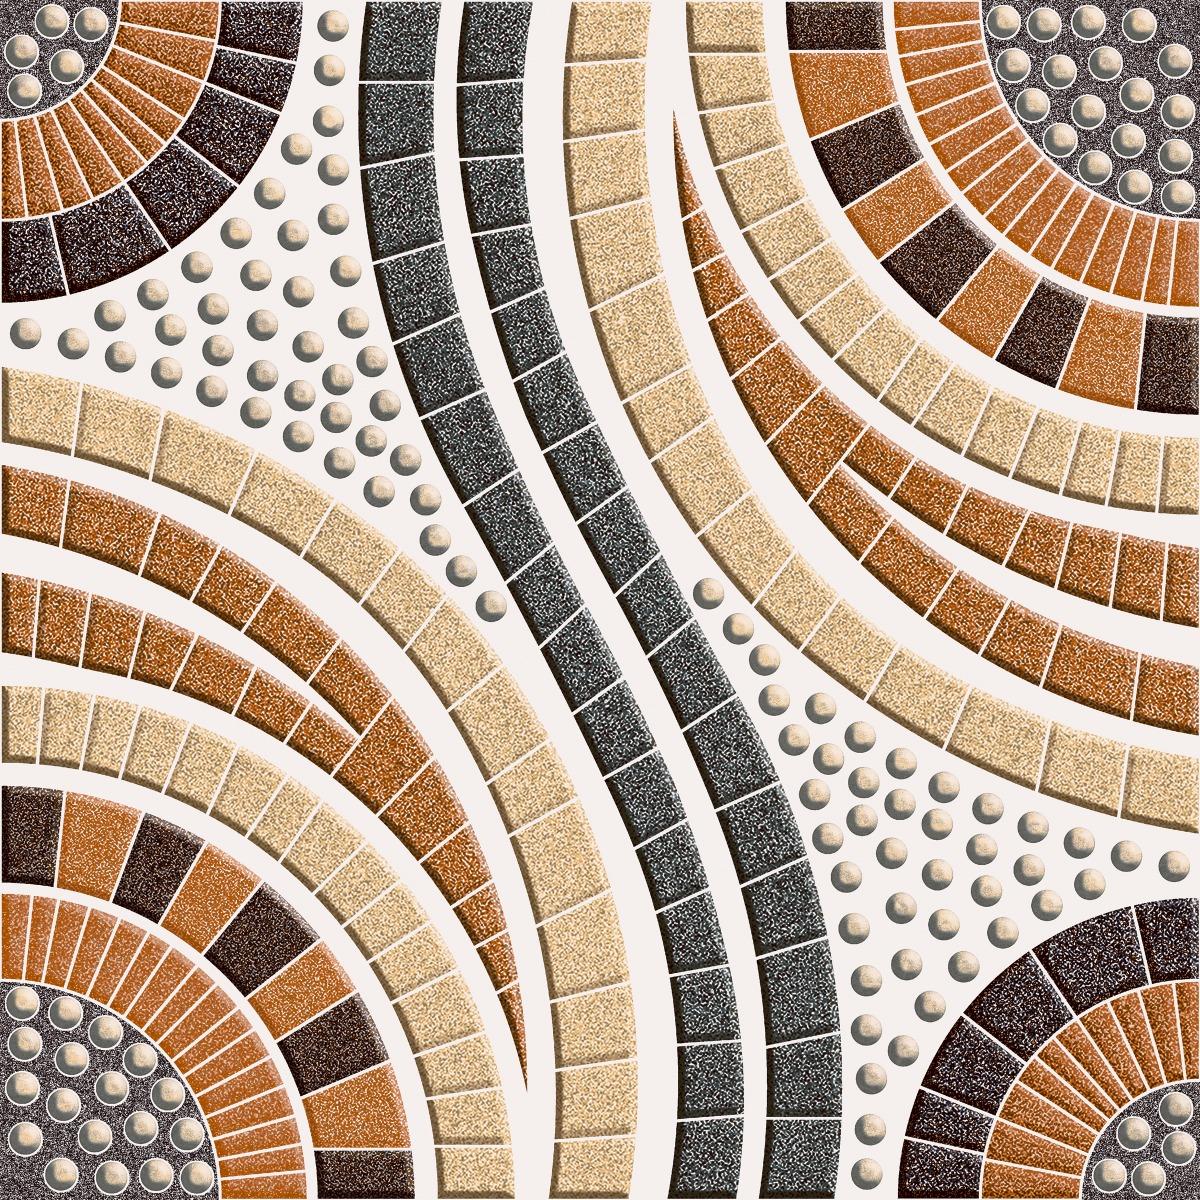 Cream Tiles for Balcony Tiles, Swimming Pool Tiles, Parking Tiles, Pathway Tiles, Commercial/Office, Outdoor Area